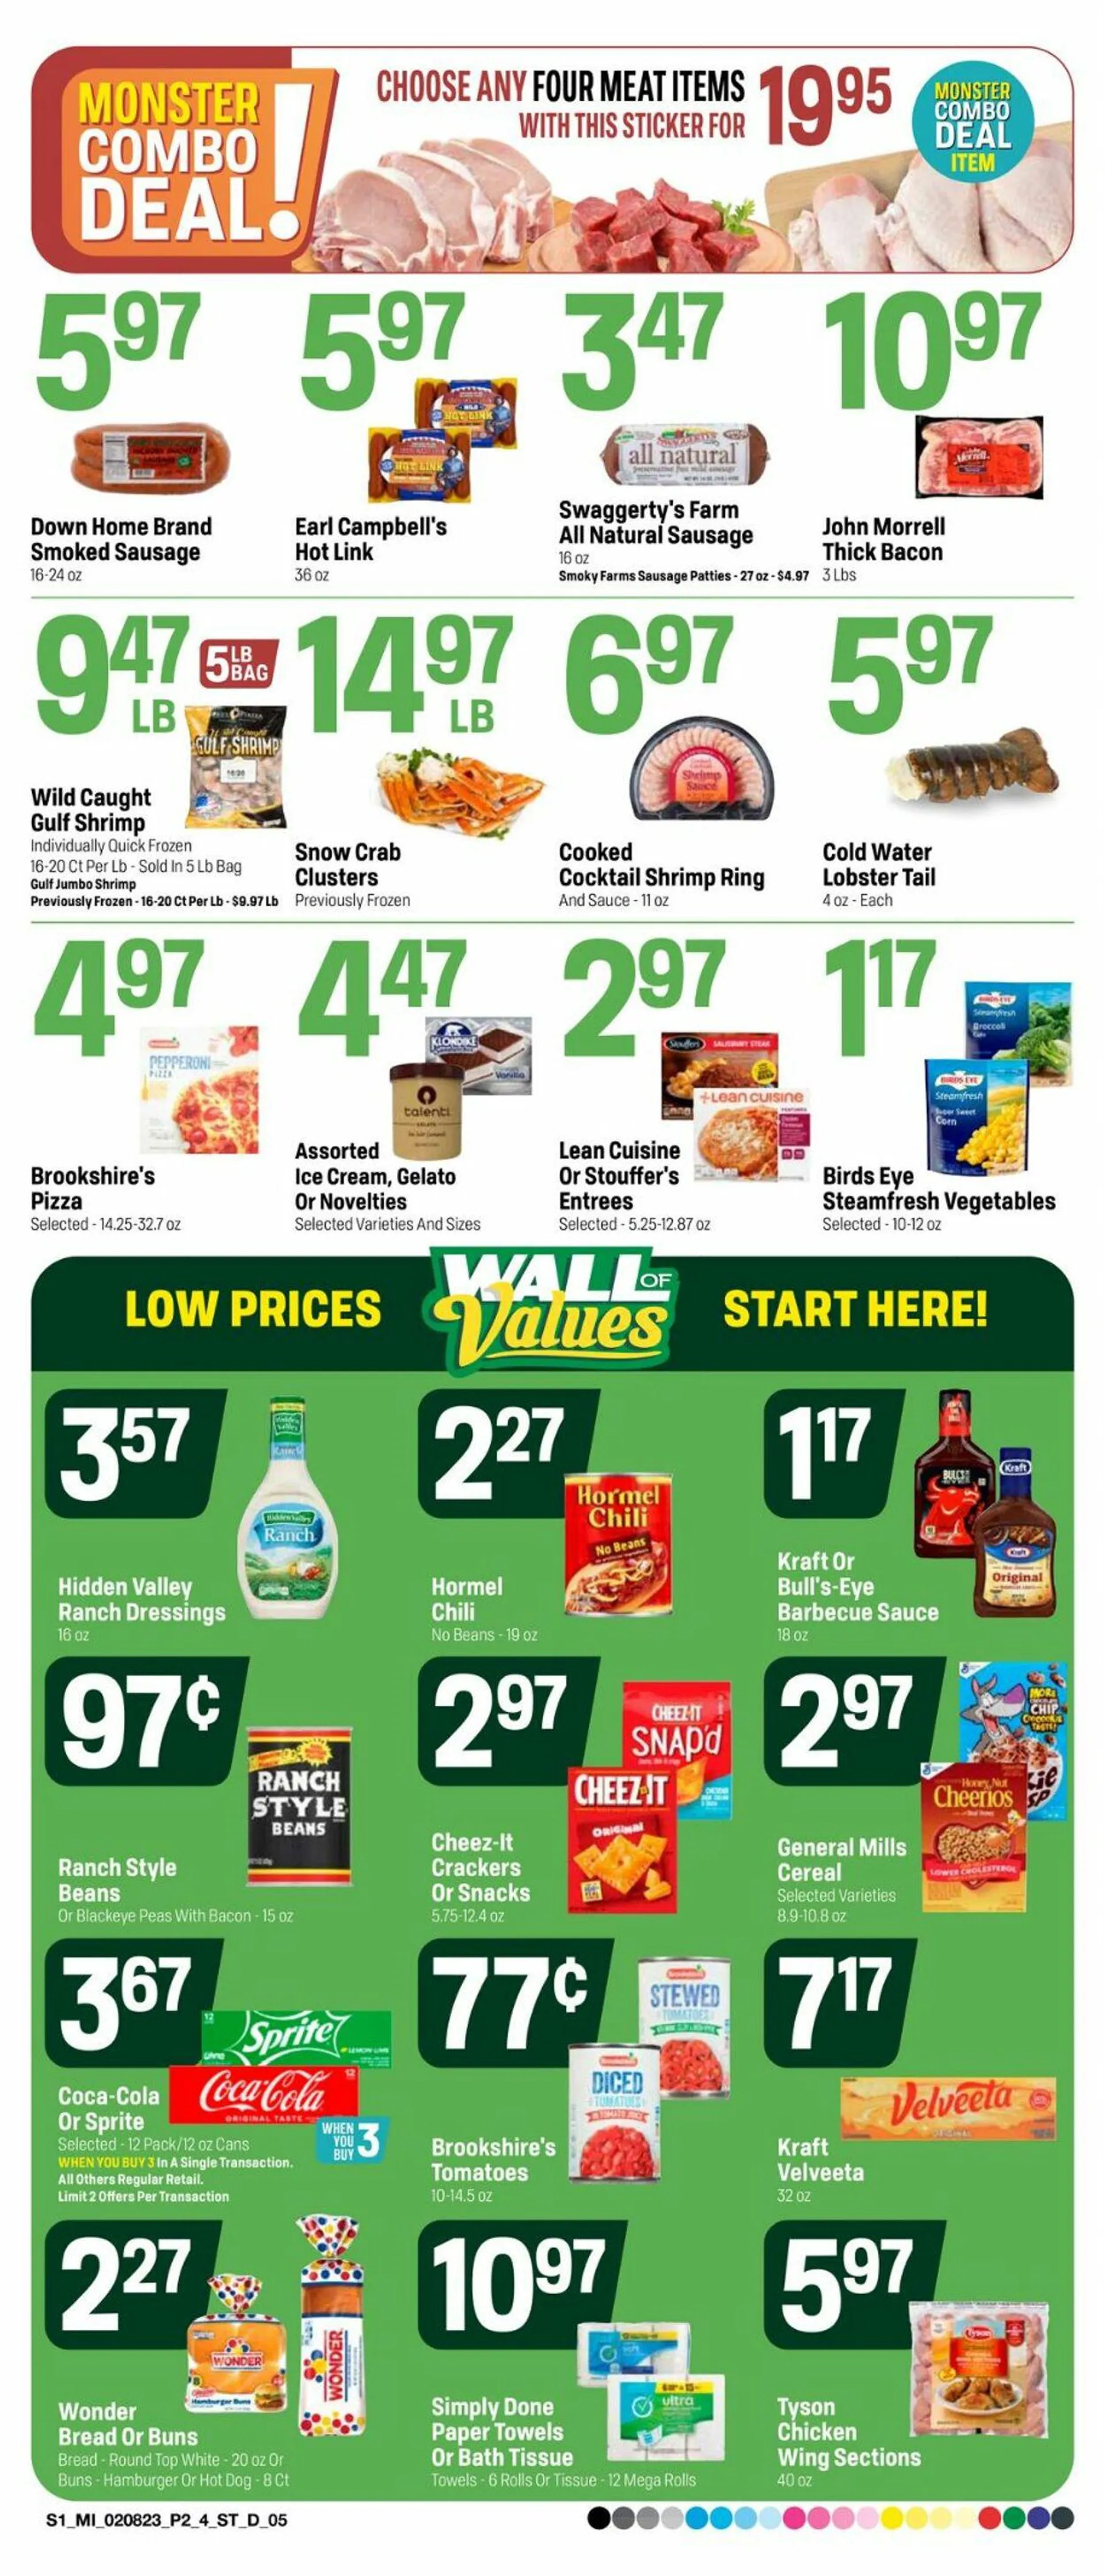 Super 1 Foods Current weekly ad - 2